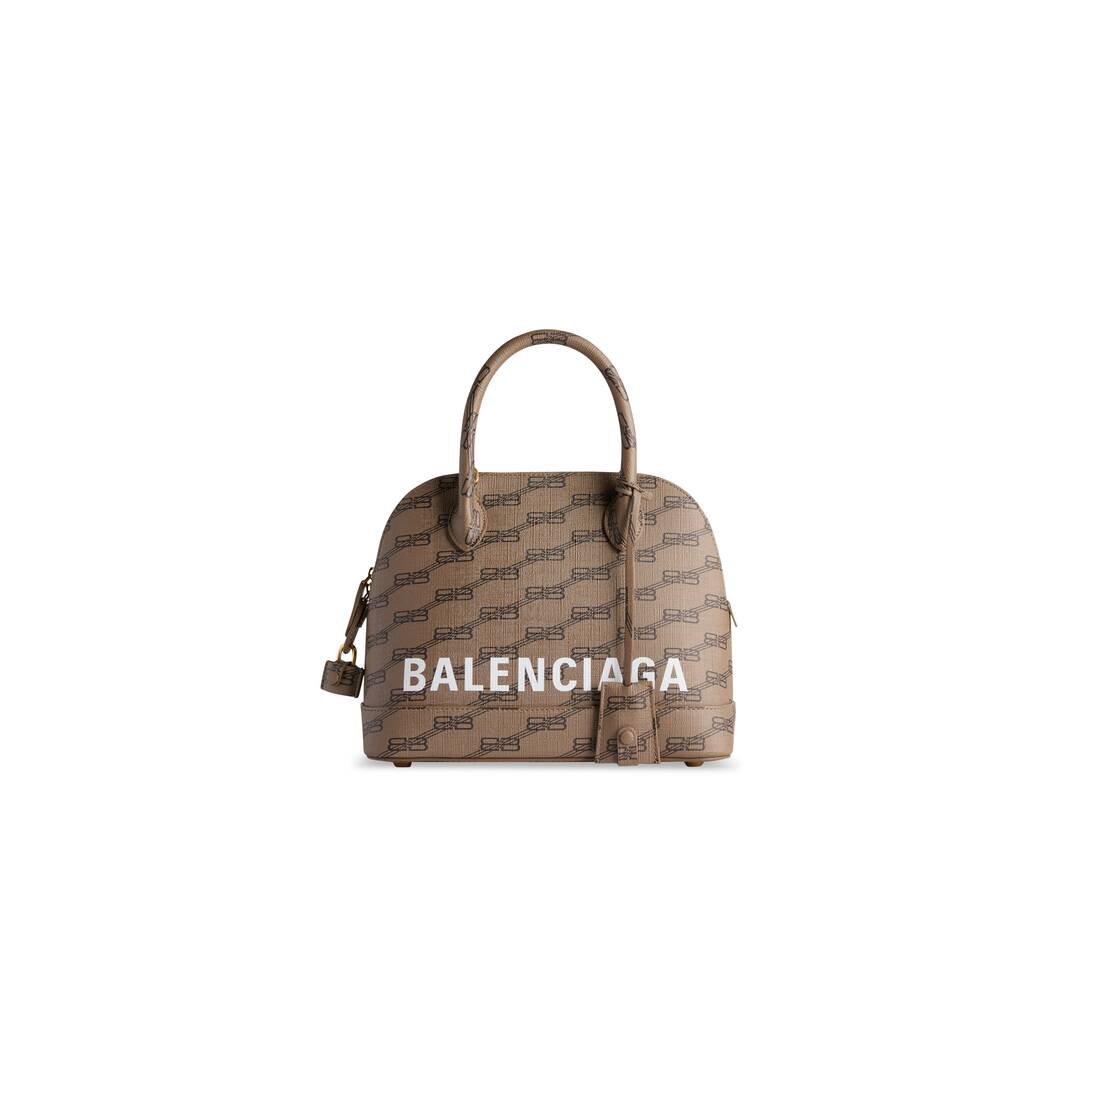 Balenciaga Hourglass Bag With Bb Monogram in Brown